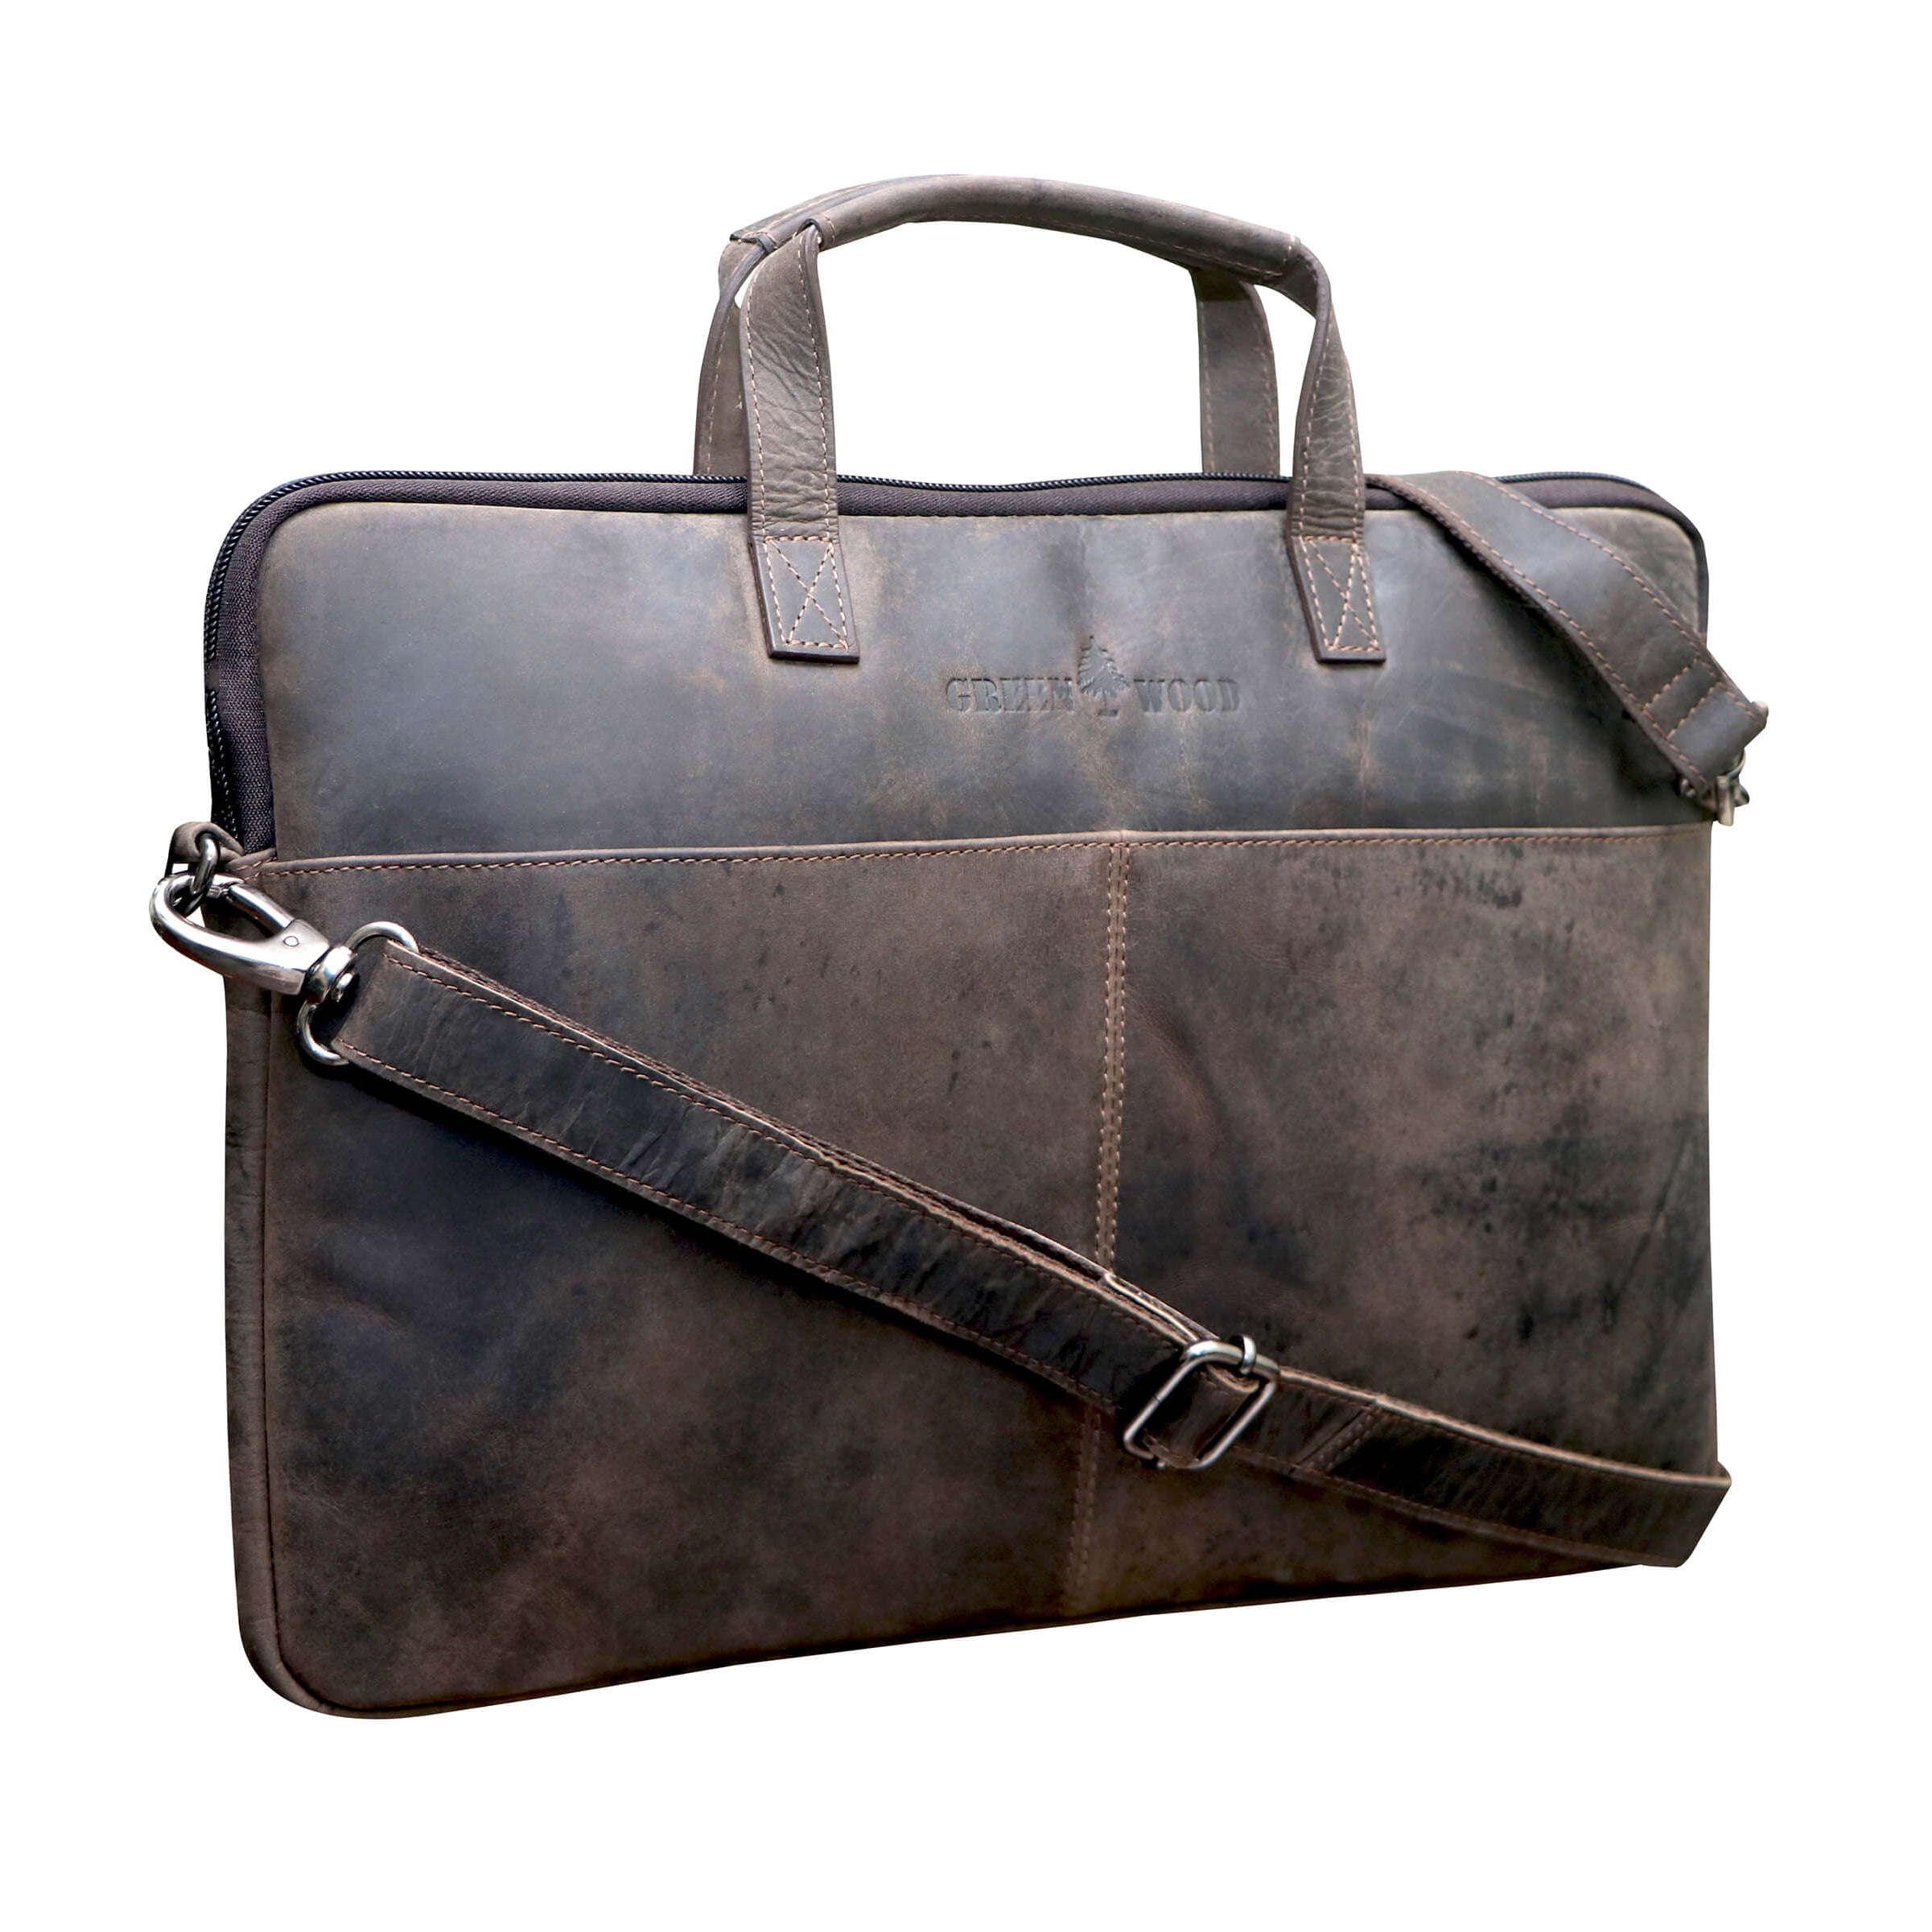 Fred Laptop Bag 13 inch Leather with Detachable Shoulder Strap MacBook Air Sleeve